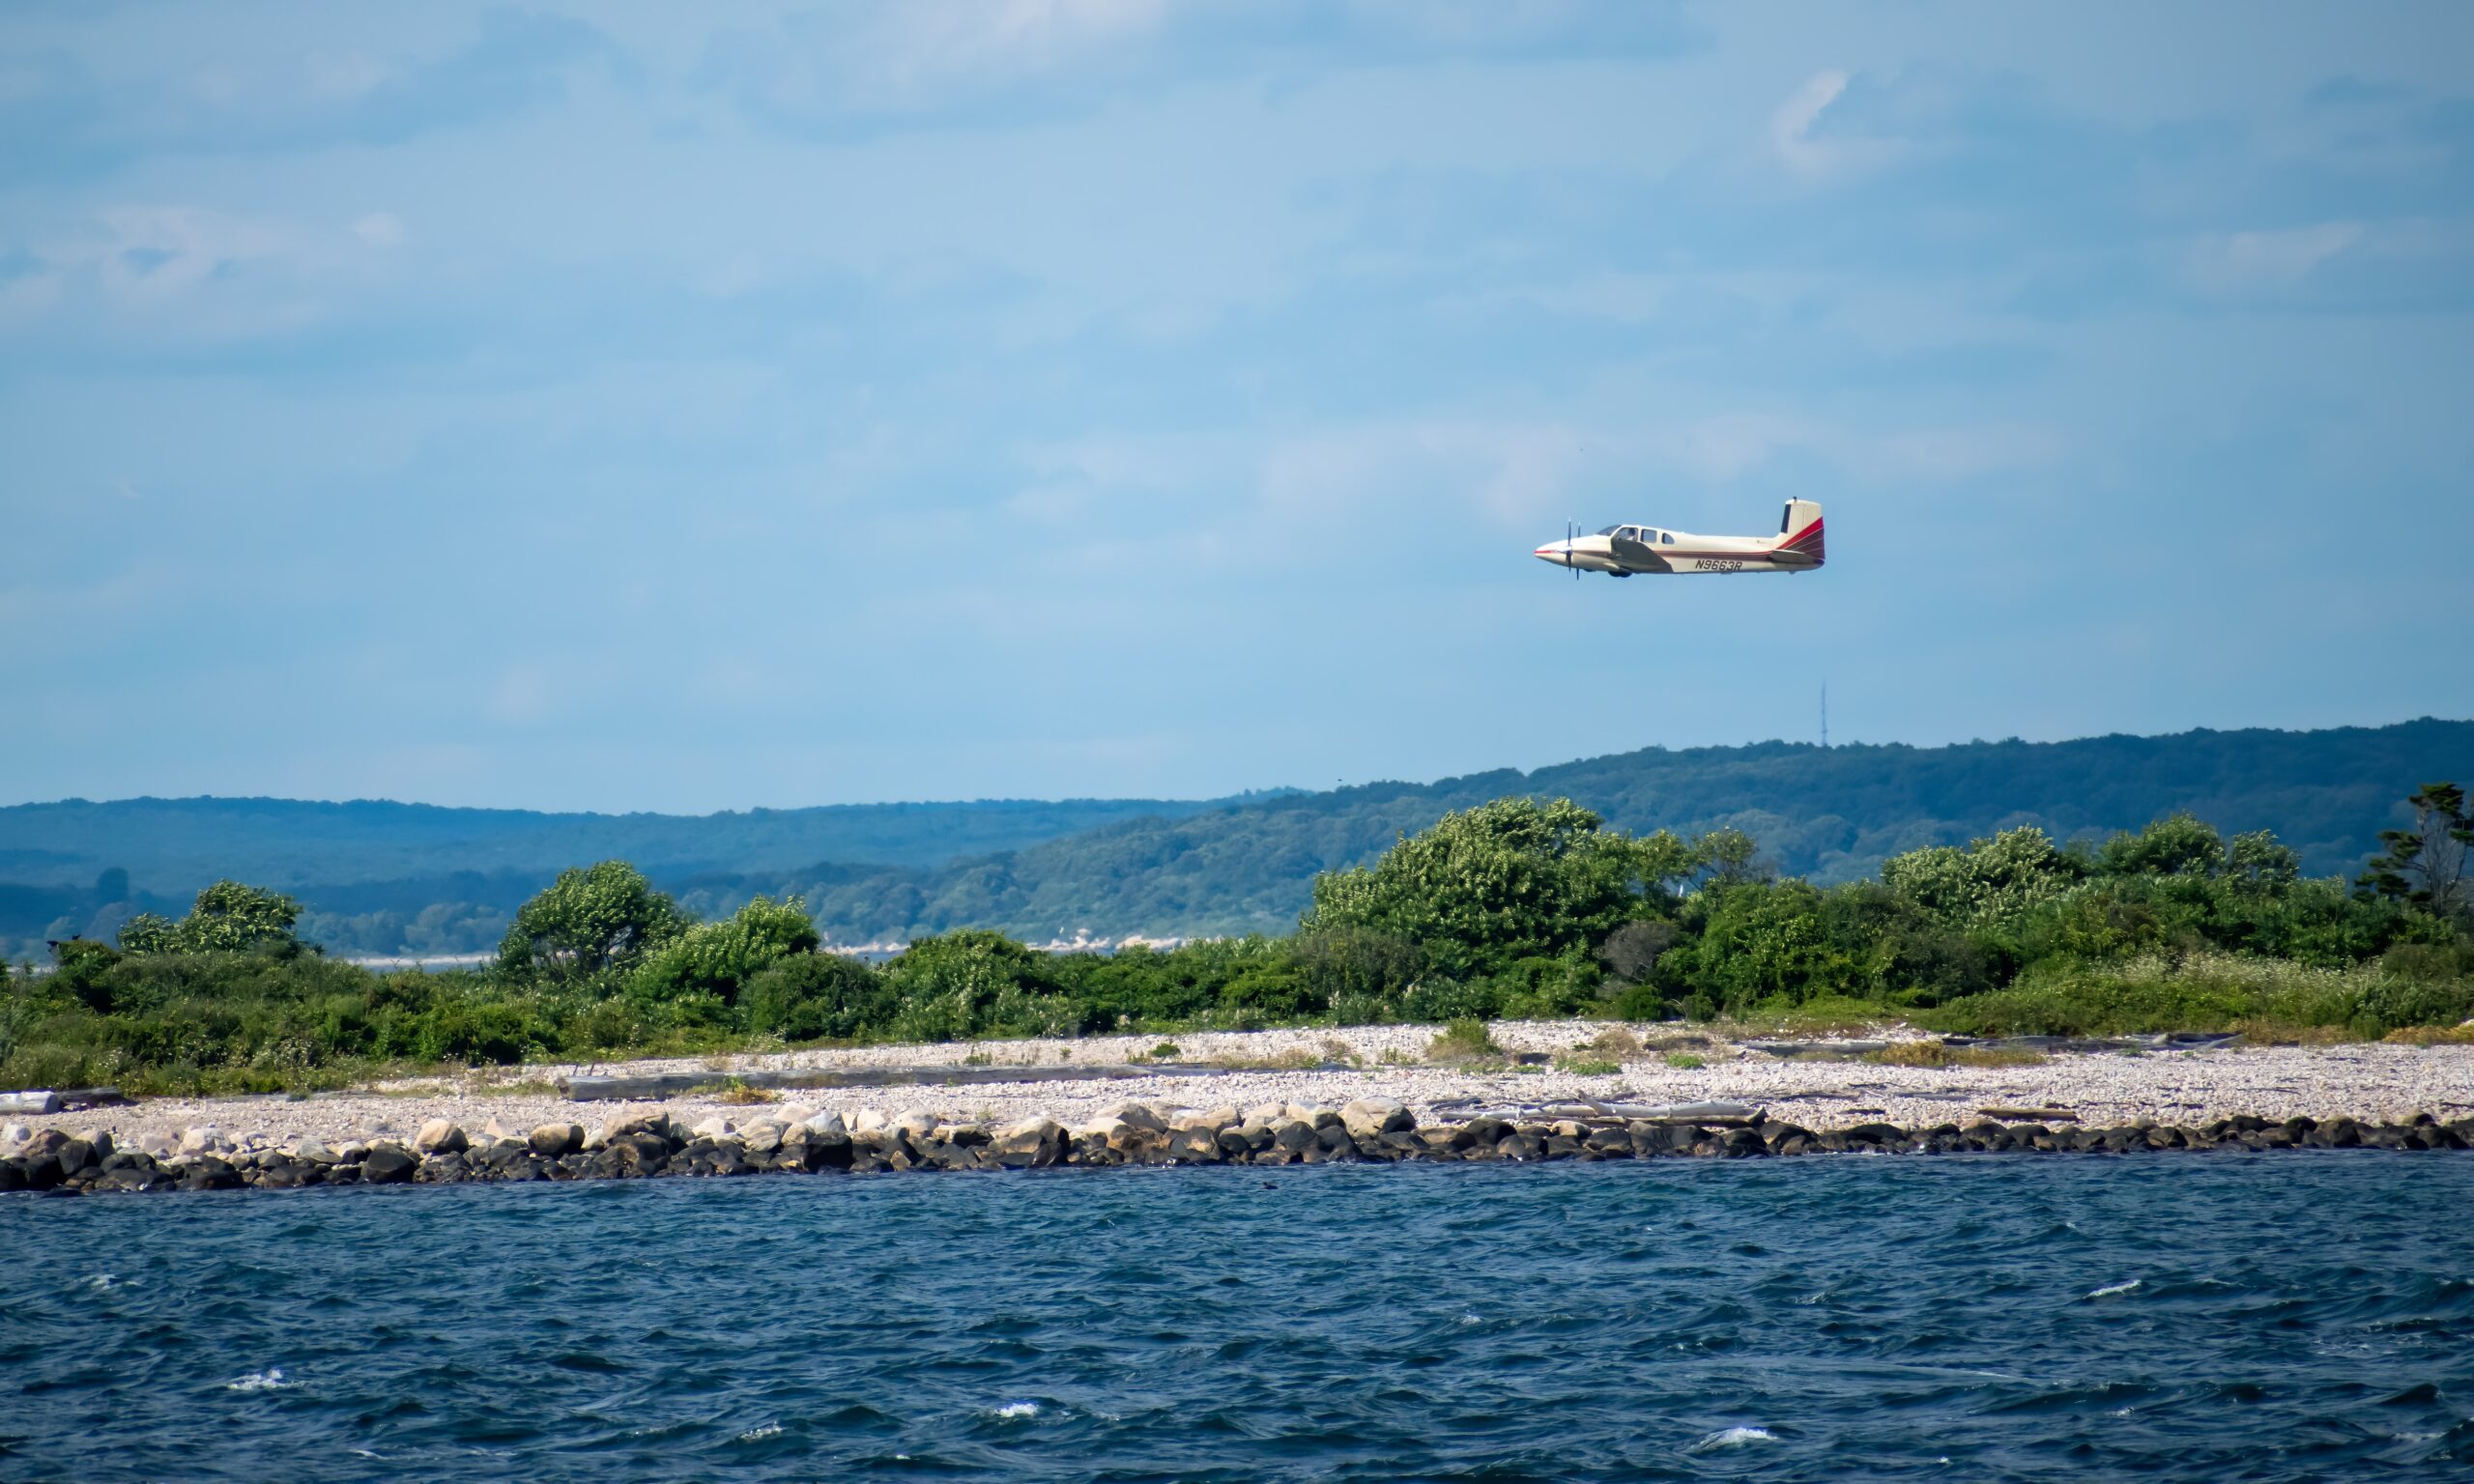 Body of water with plane about to land